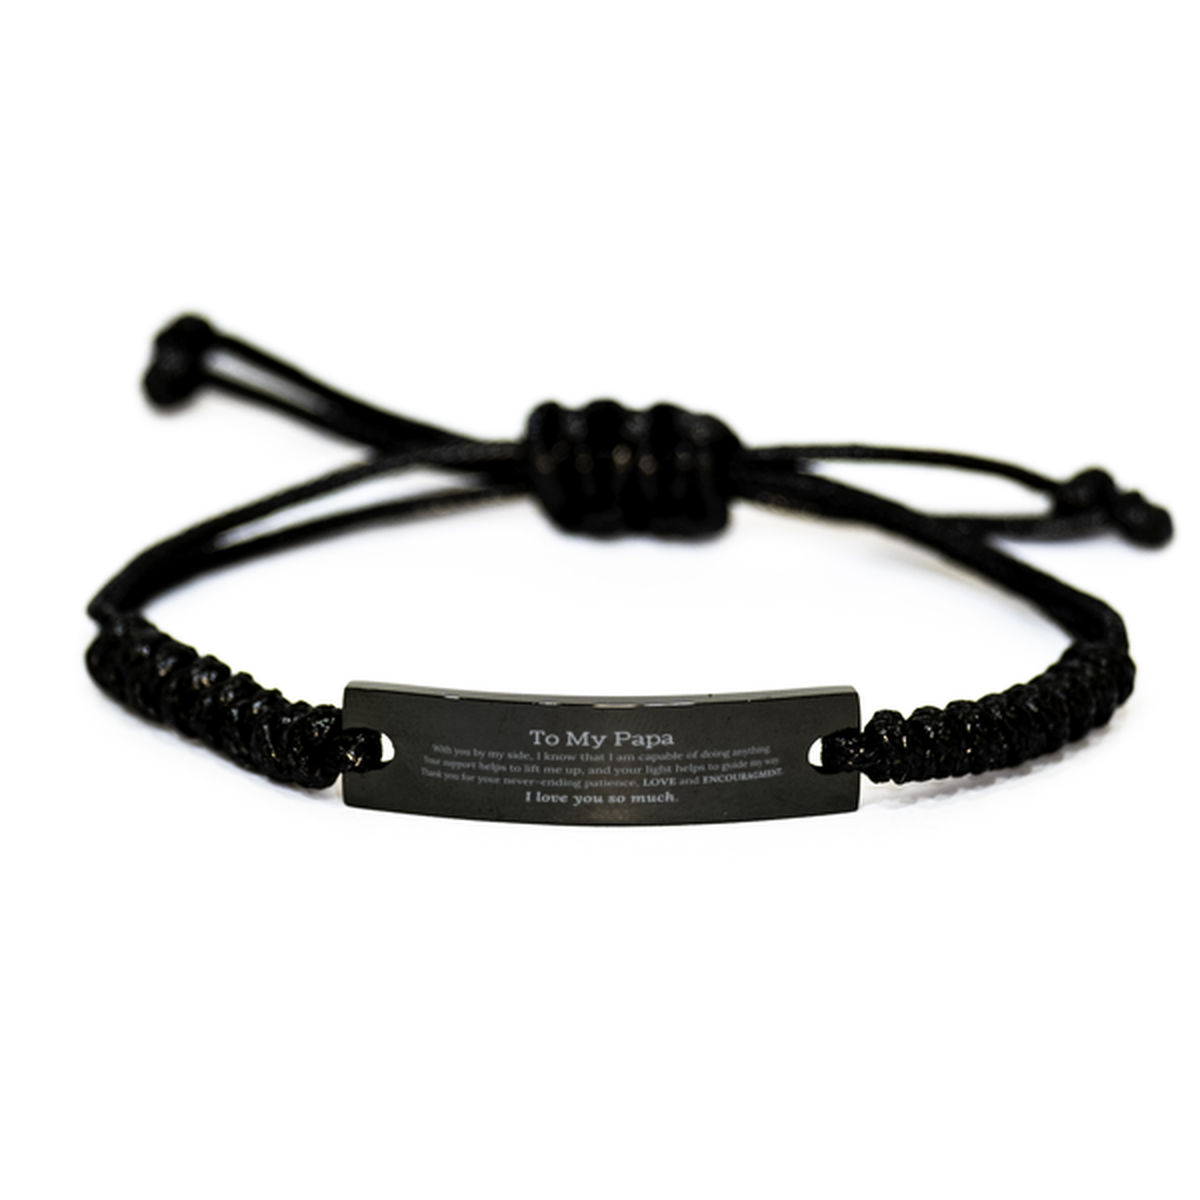 Appreciation Papa Black Rope Bracelet Gifts, To My Papa Birthday Christmas Wedding Keepsake Gifts for Papa With you by my side, I know that I am capable of doing anything. I love you so much